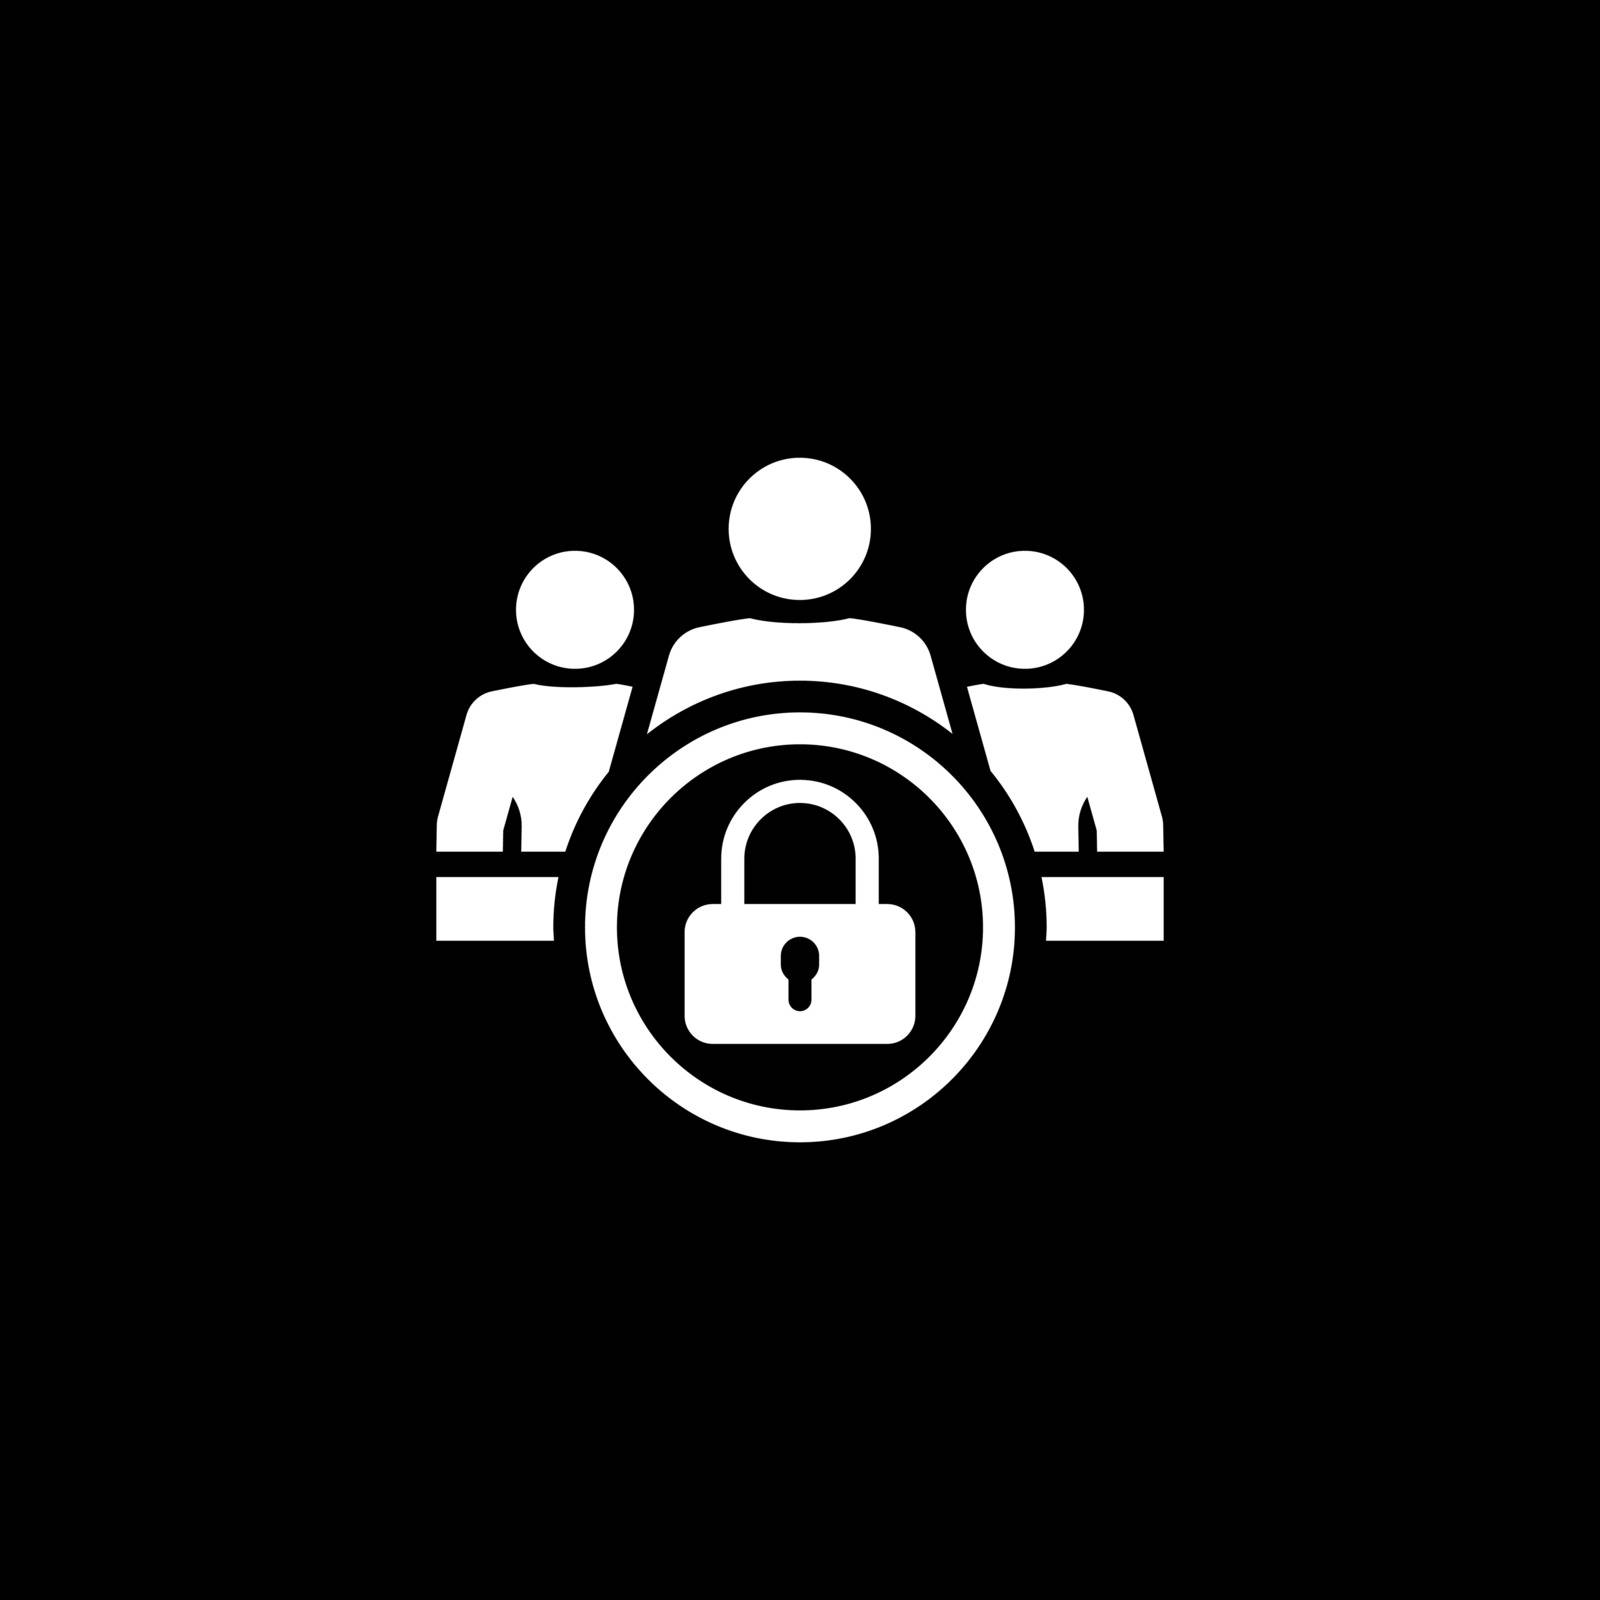 Personal Data Protection Icon. Flat Design. Business Concept Isolated Illustration.